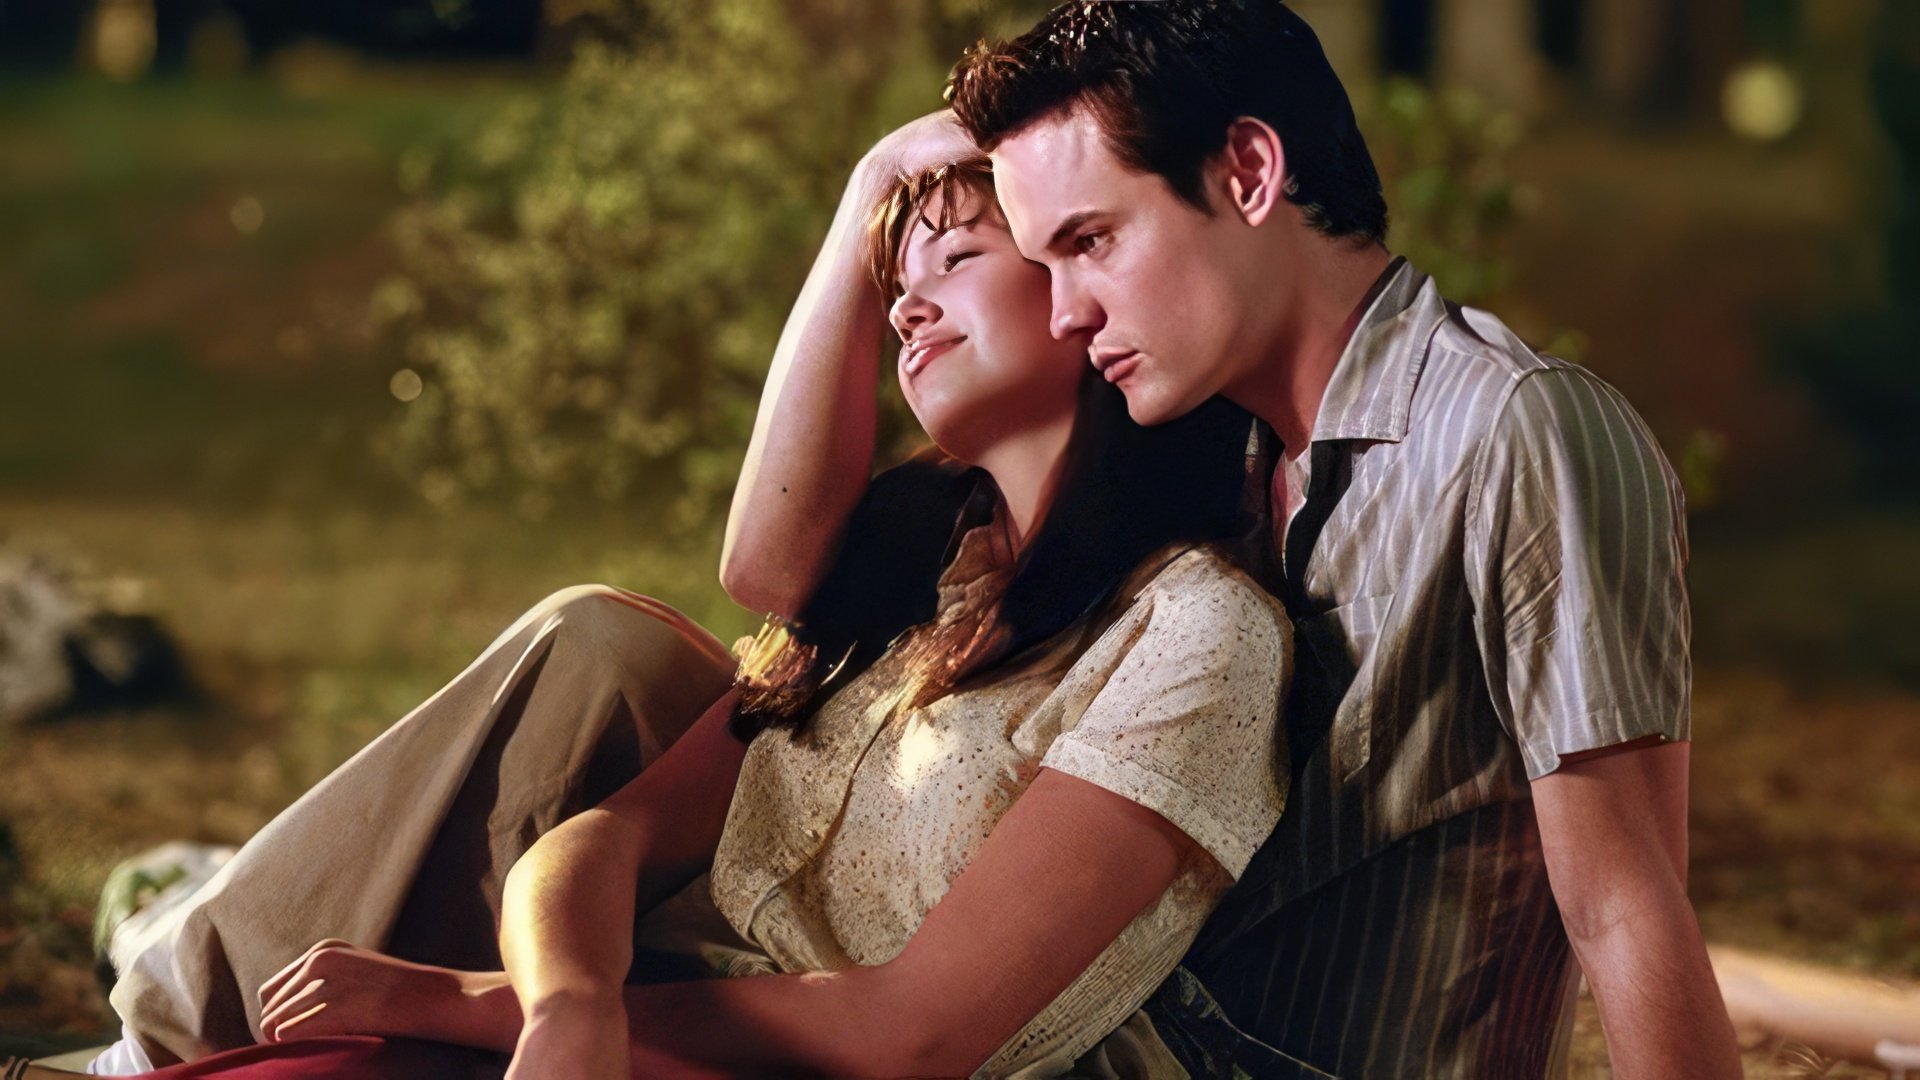  Mandy Moore and Shane West in A Walk to Remember